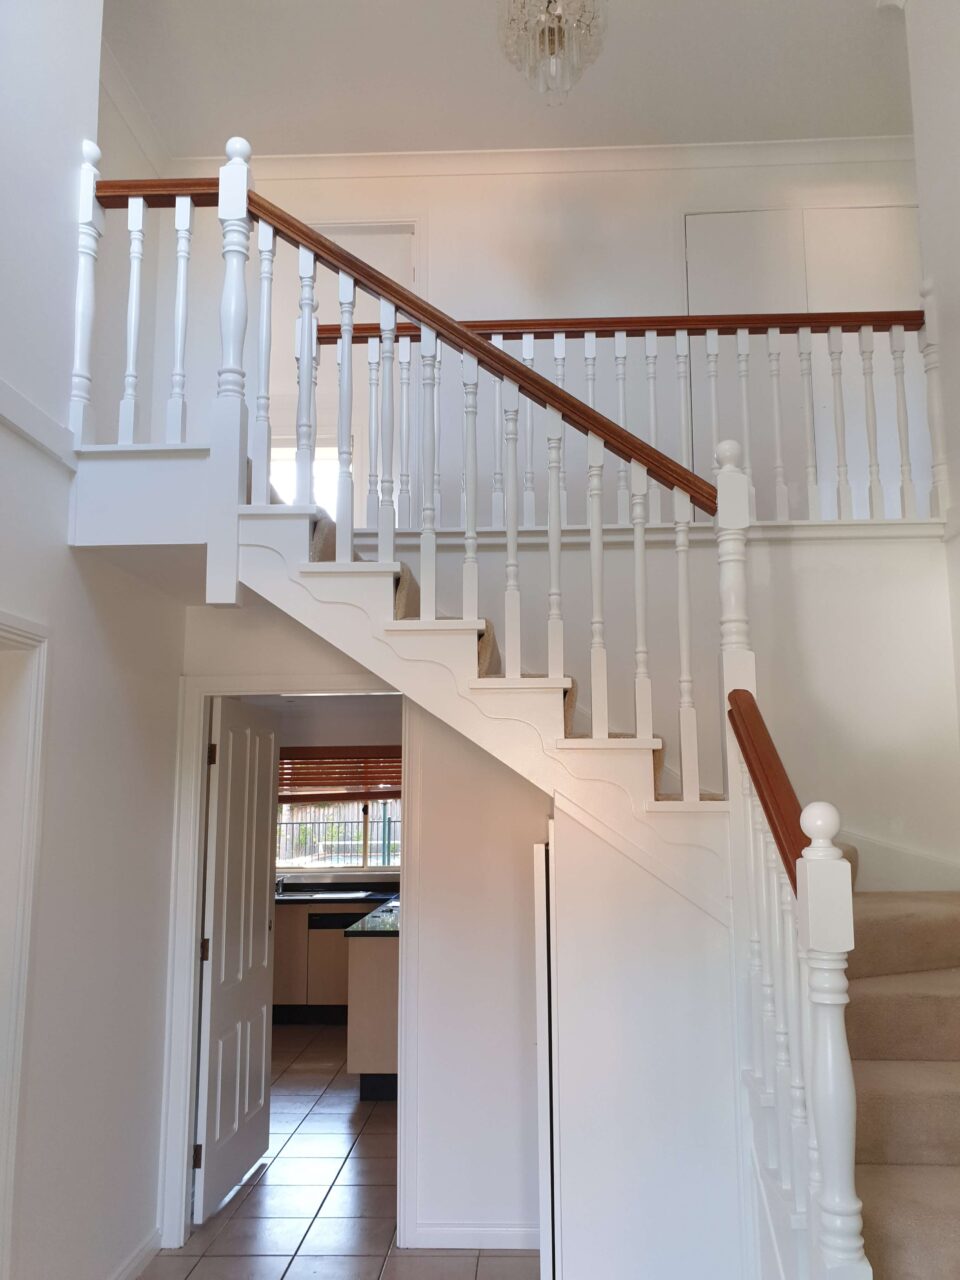 After - Interior Painting West Pennant Hills